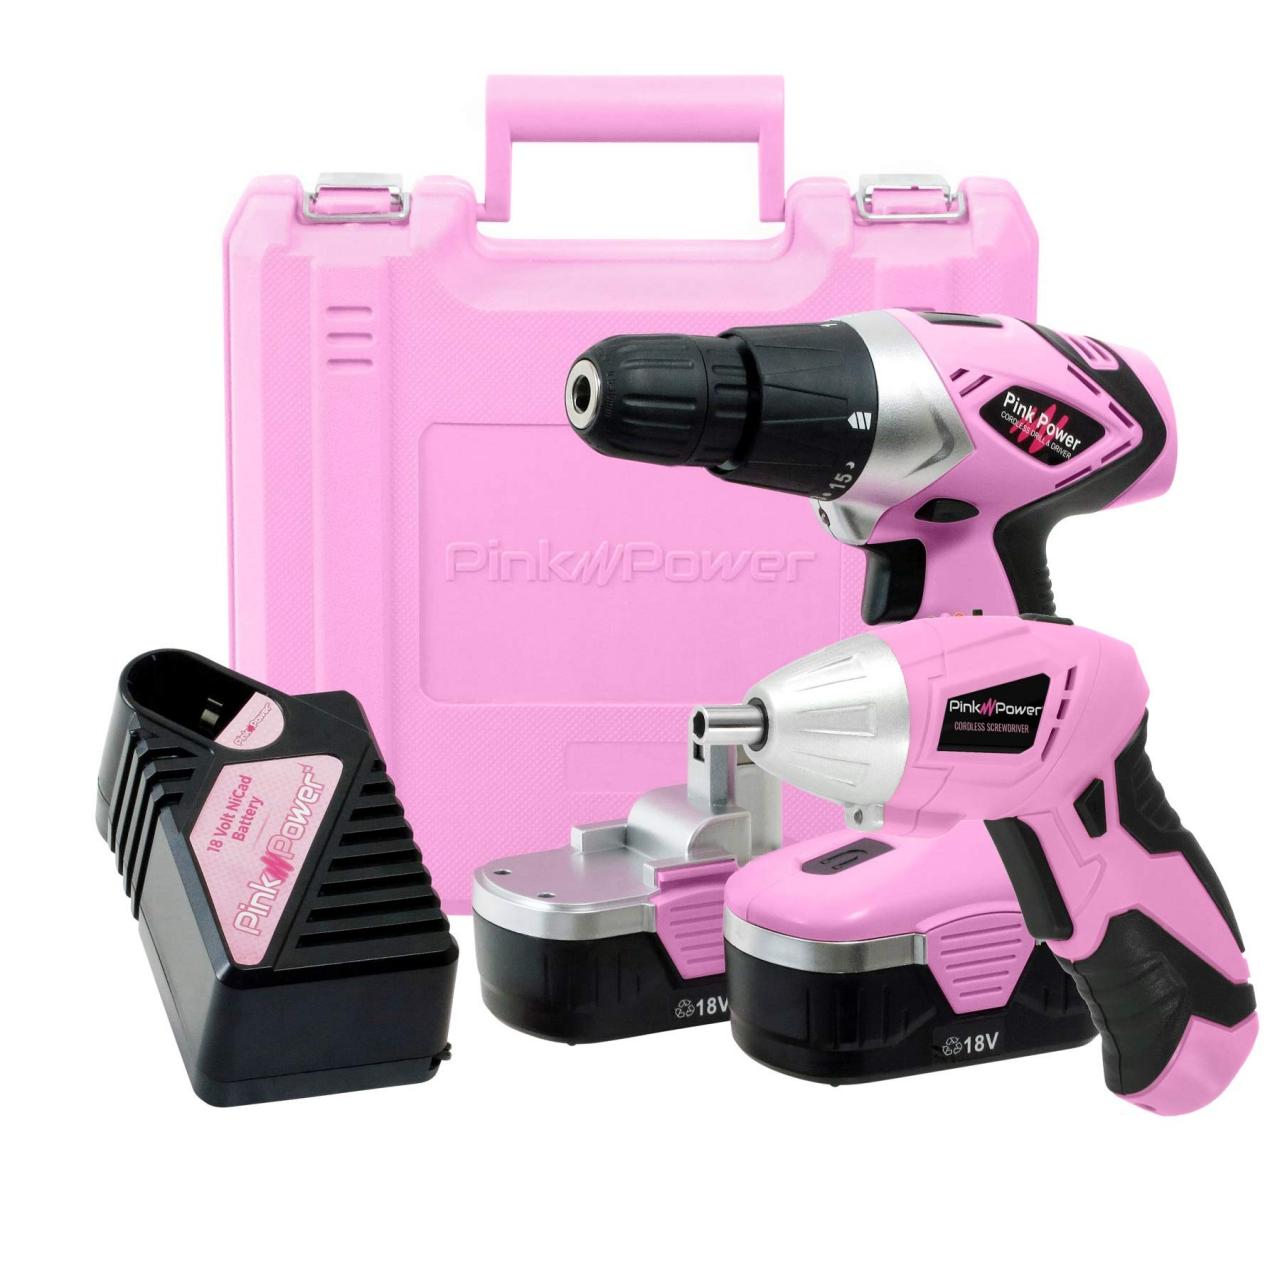 Buy Pink Power PP121LI 12V Cordless Drill & Driver Tool Kit for Women- Tool  Case, Lithium Ion Electric Drill, Drill Set, Battery & Charger Online in  Hong Kong. B01MYQ79A7